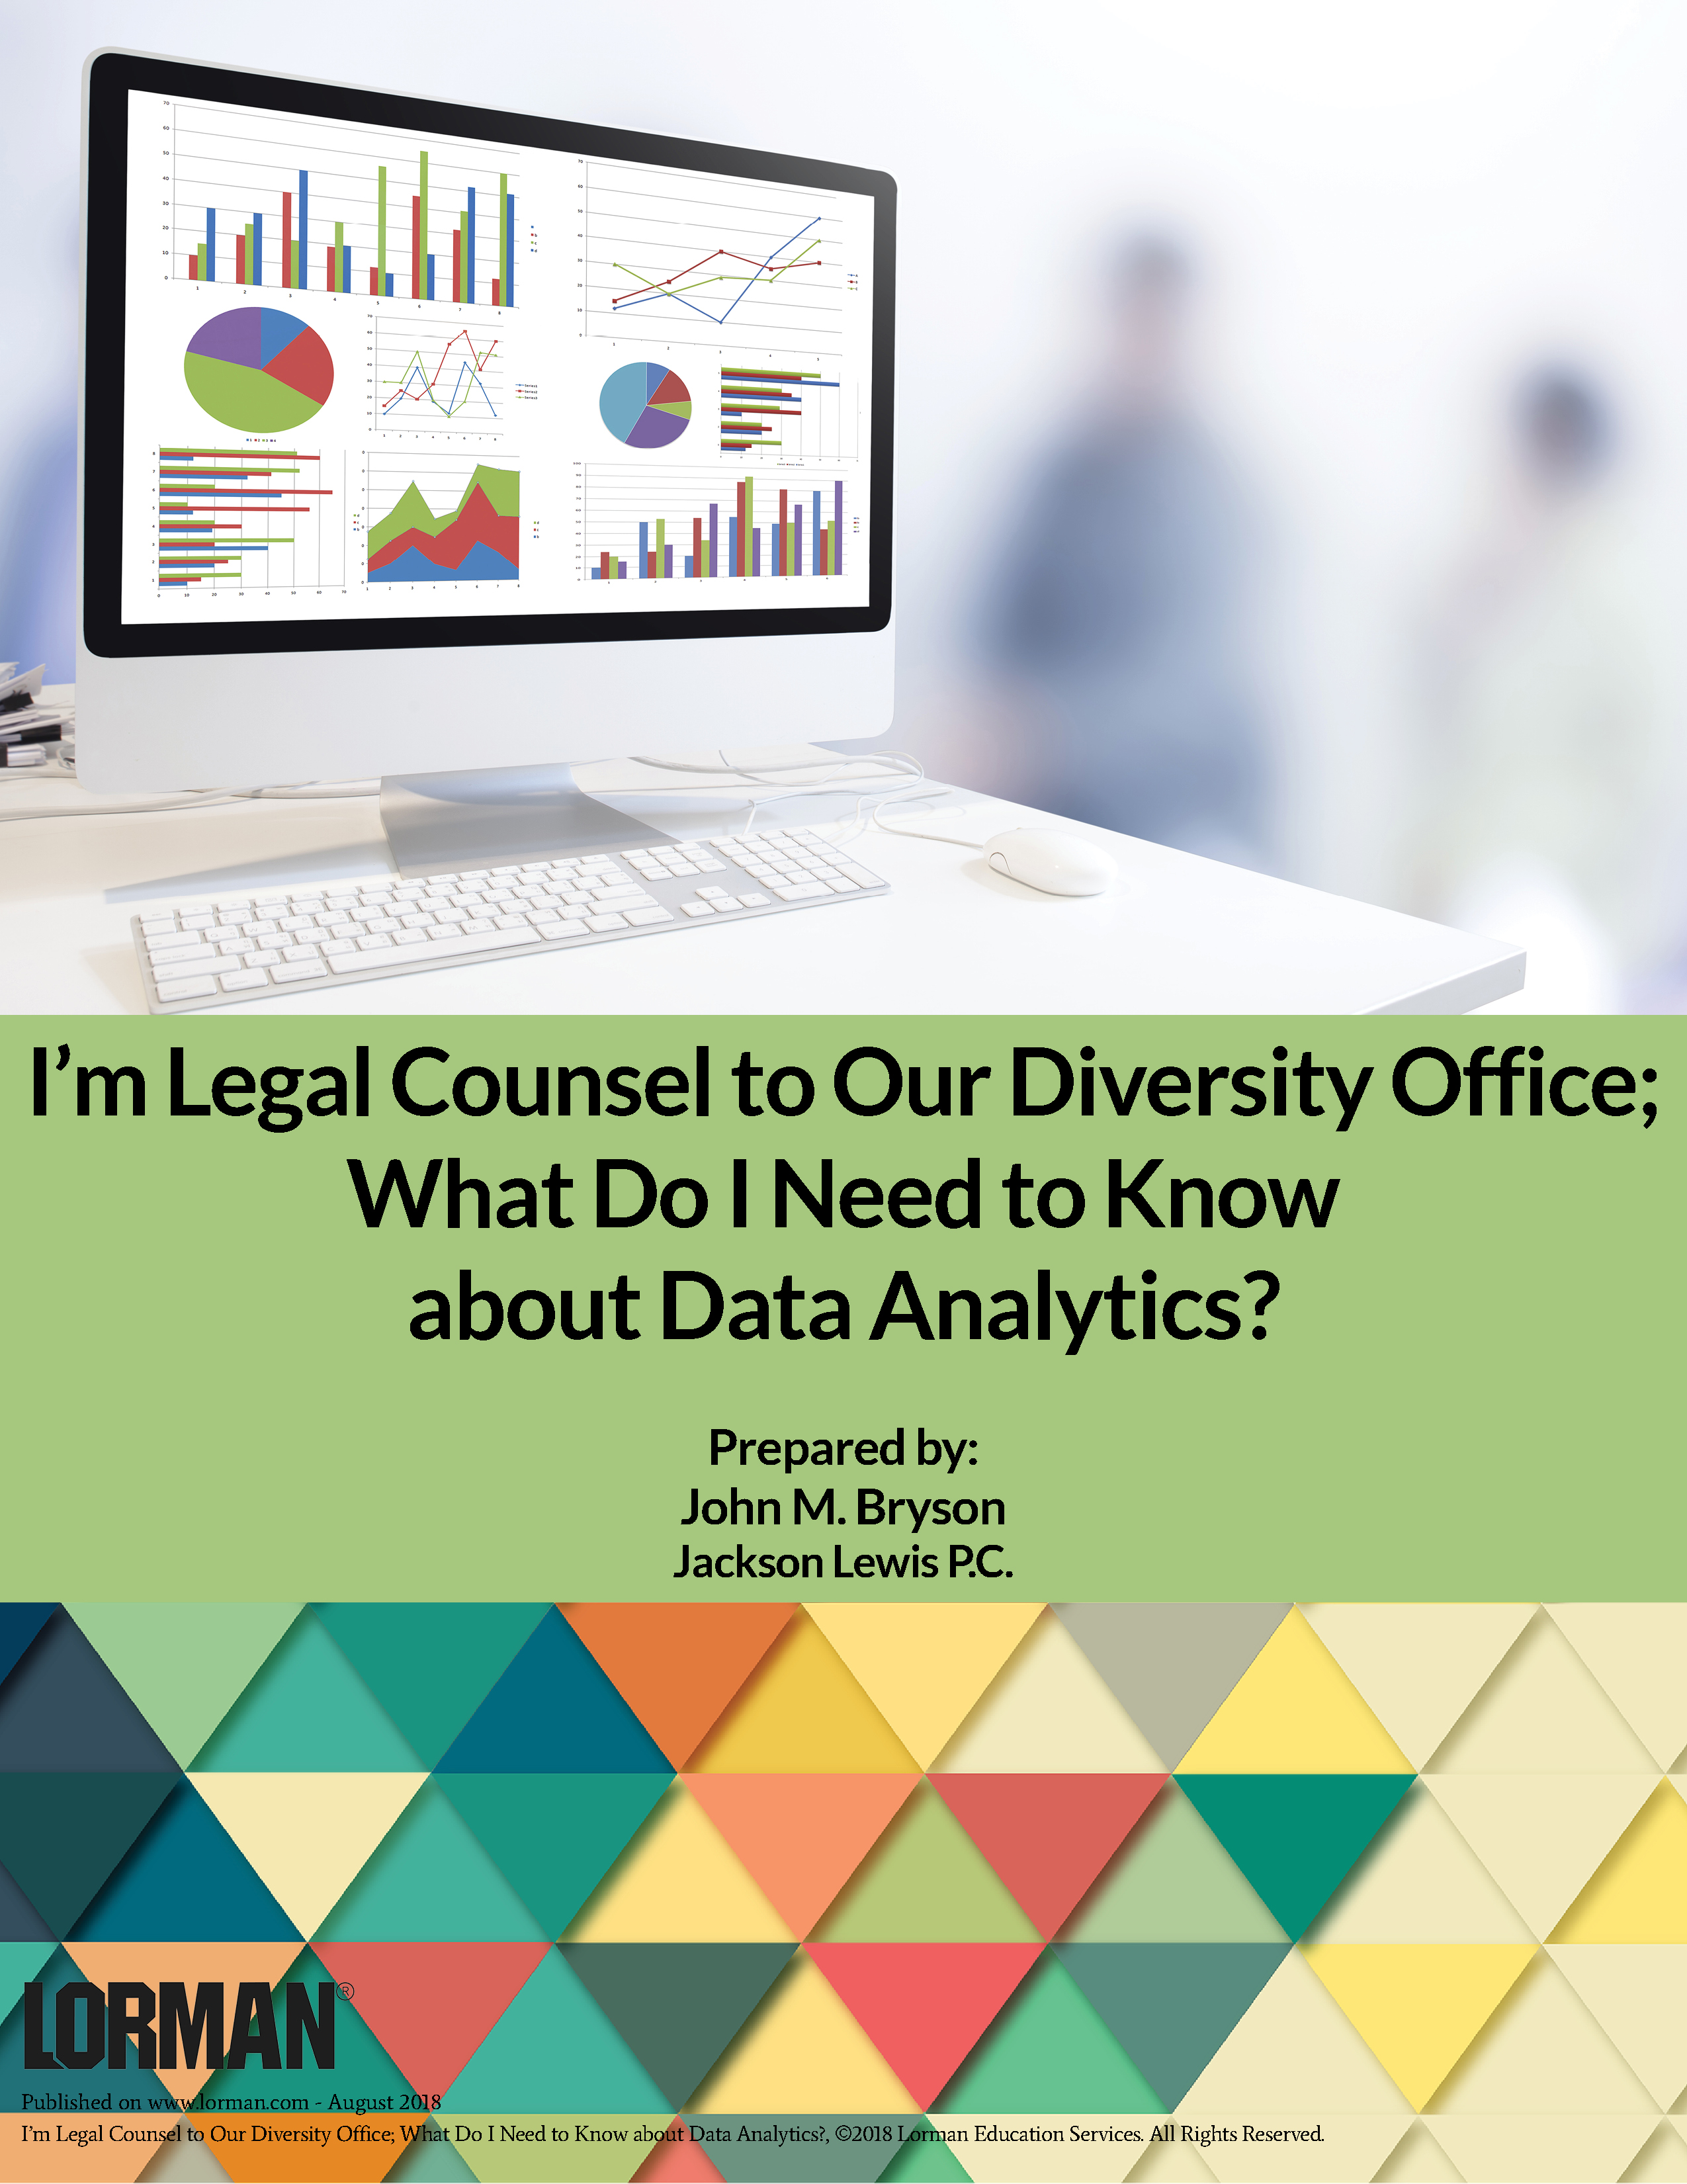 I’m Legal Counsel To Our Diversity Office; What Do I Need To Know About Data Analytics?